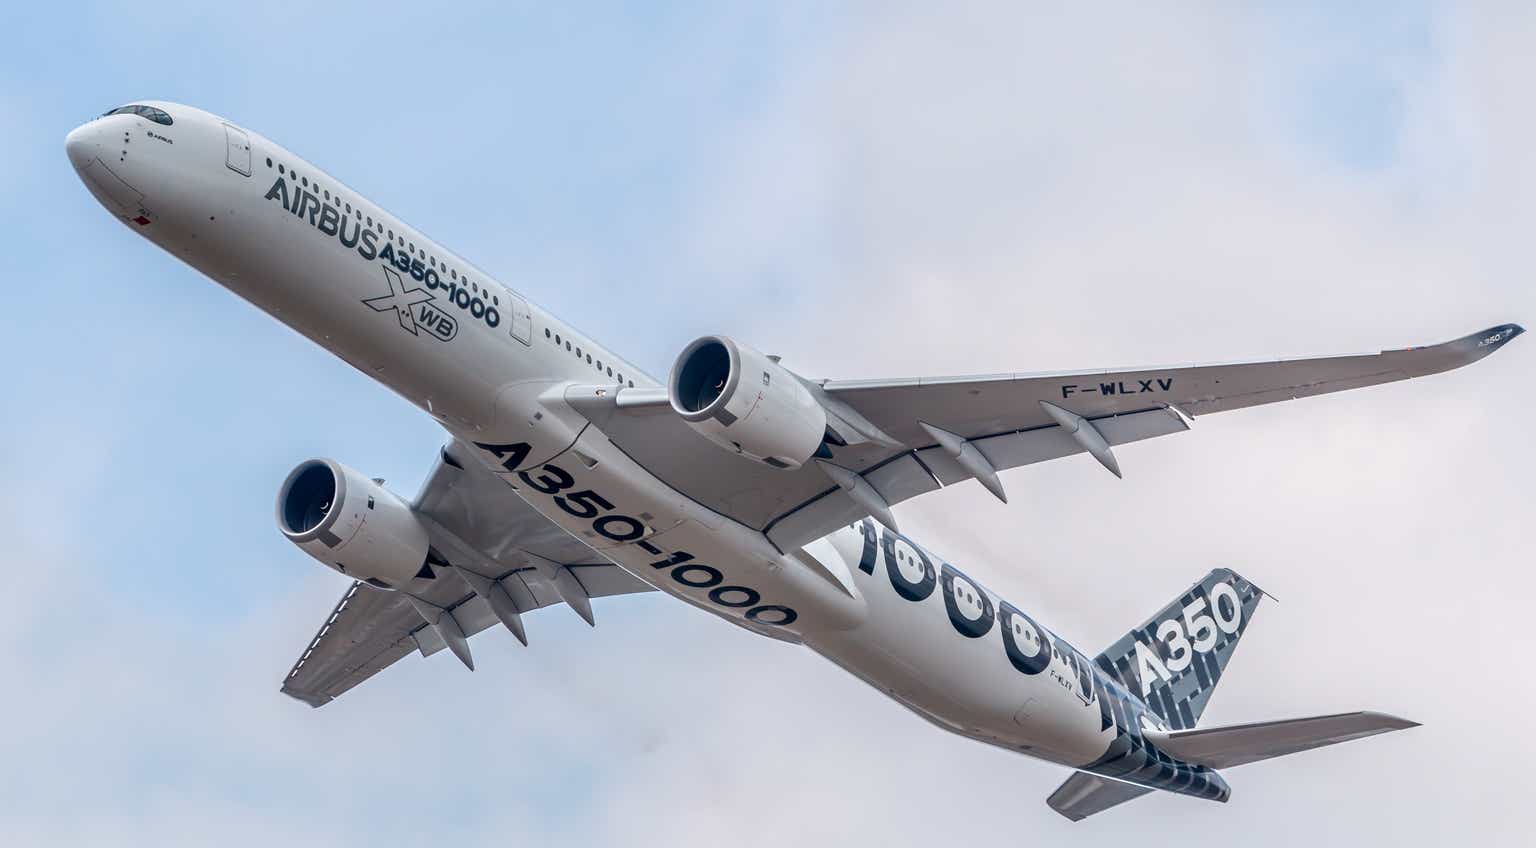 Airbus Is A Purchase On Supply Goal Expectations And Future Progress (OTCMKTS:EADSF)